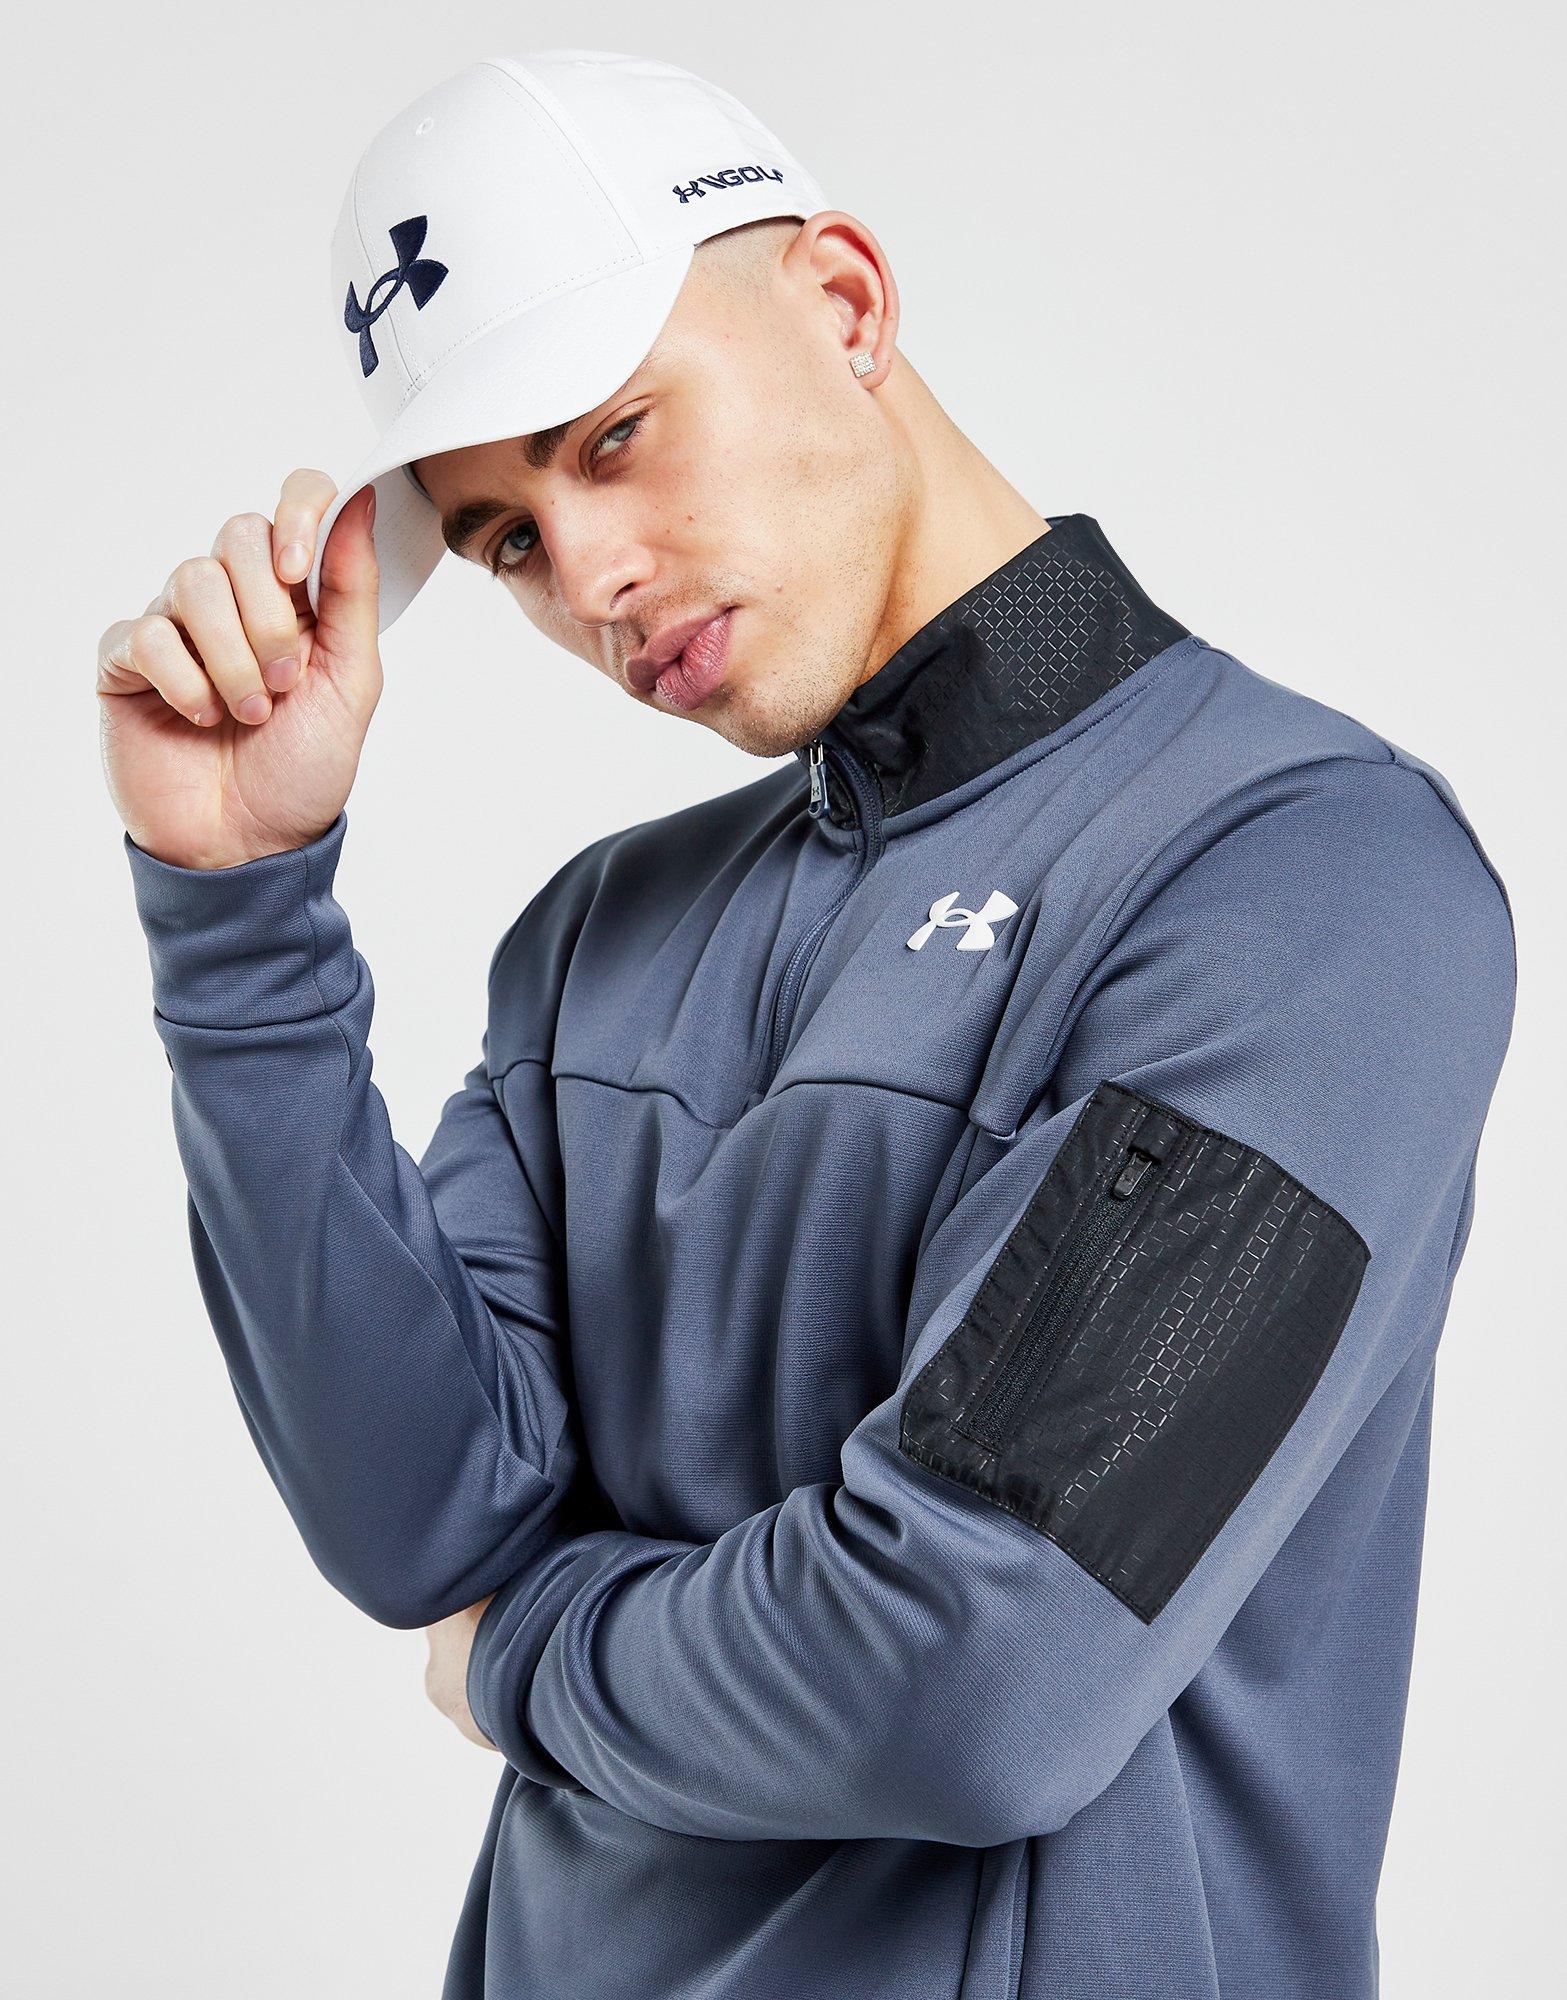 Under Armour Casquette Golf 96 Blanc- JD Sports France